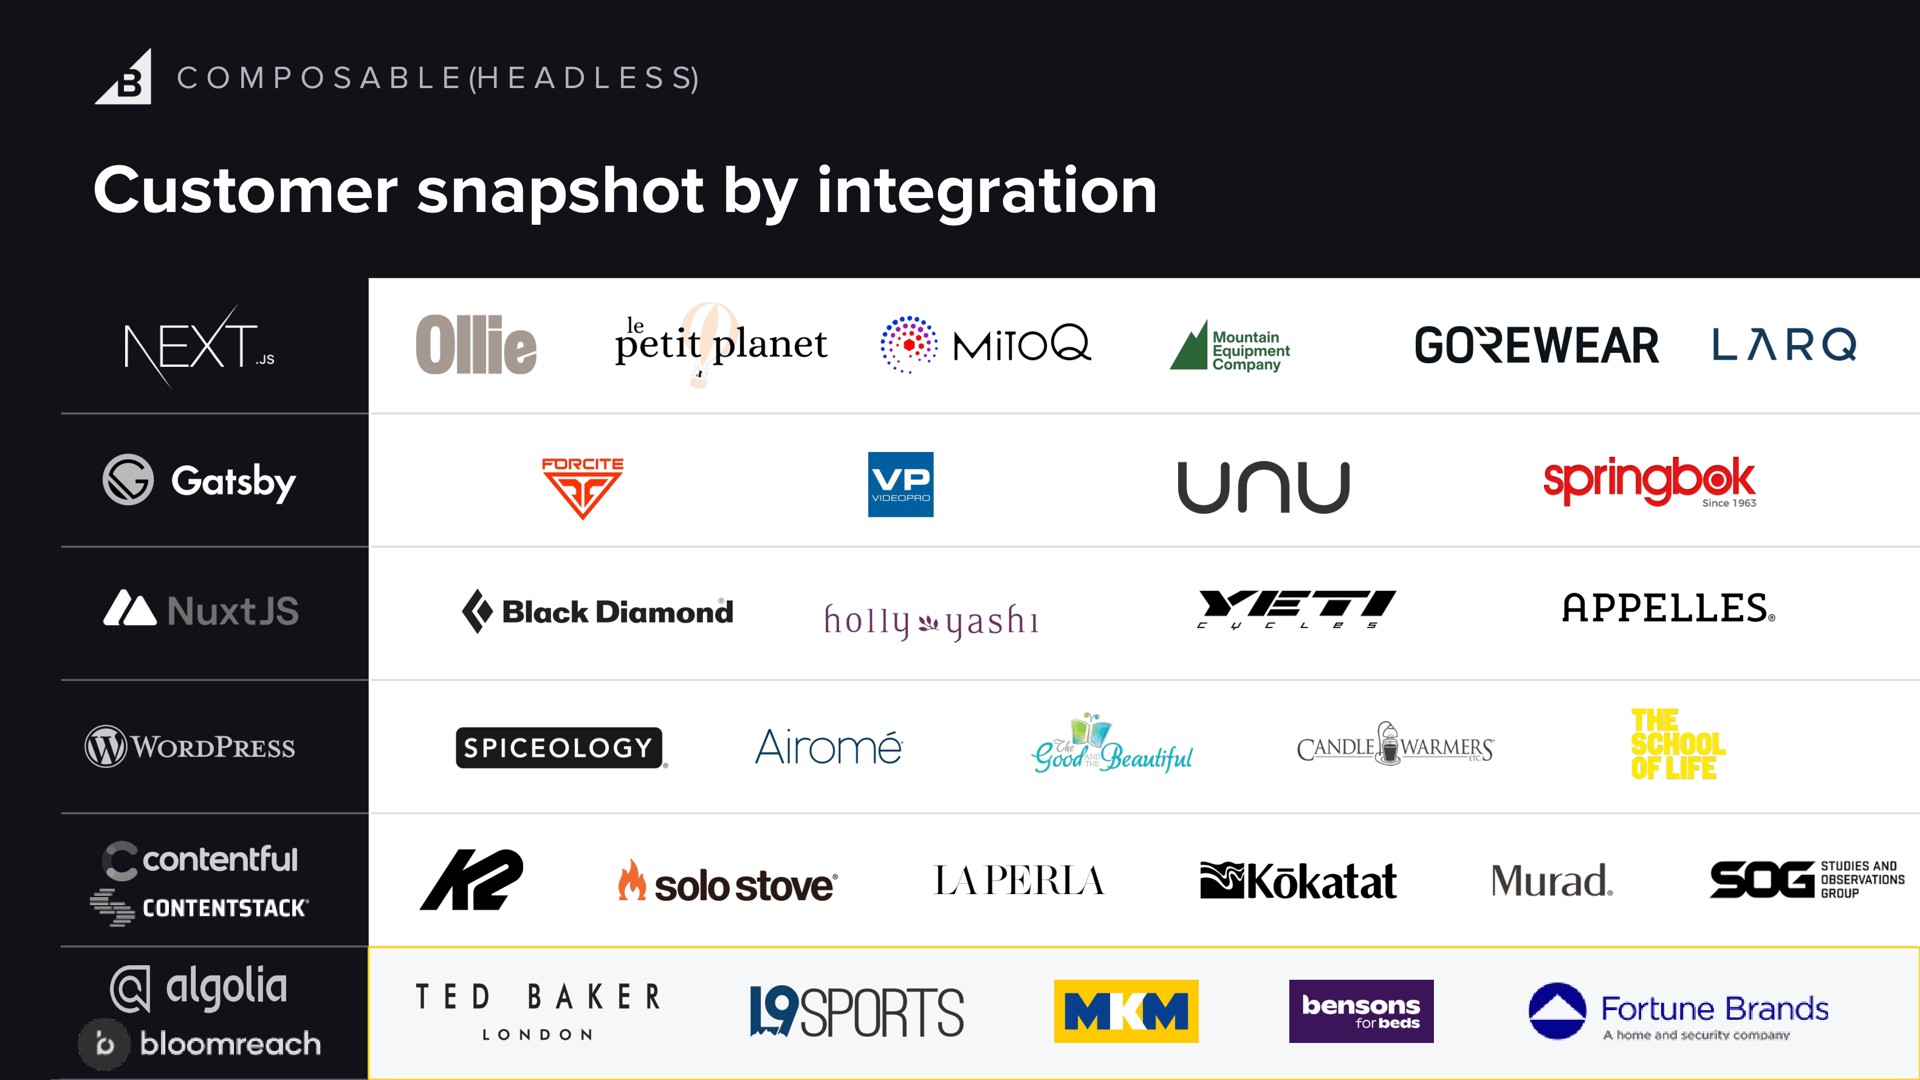 customer snapshot by integration next petit planet a sog ted baker i sports fortune brands | BigCommerce